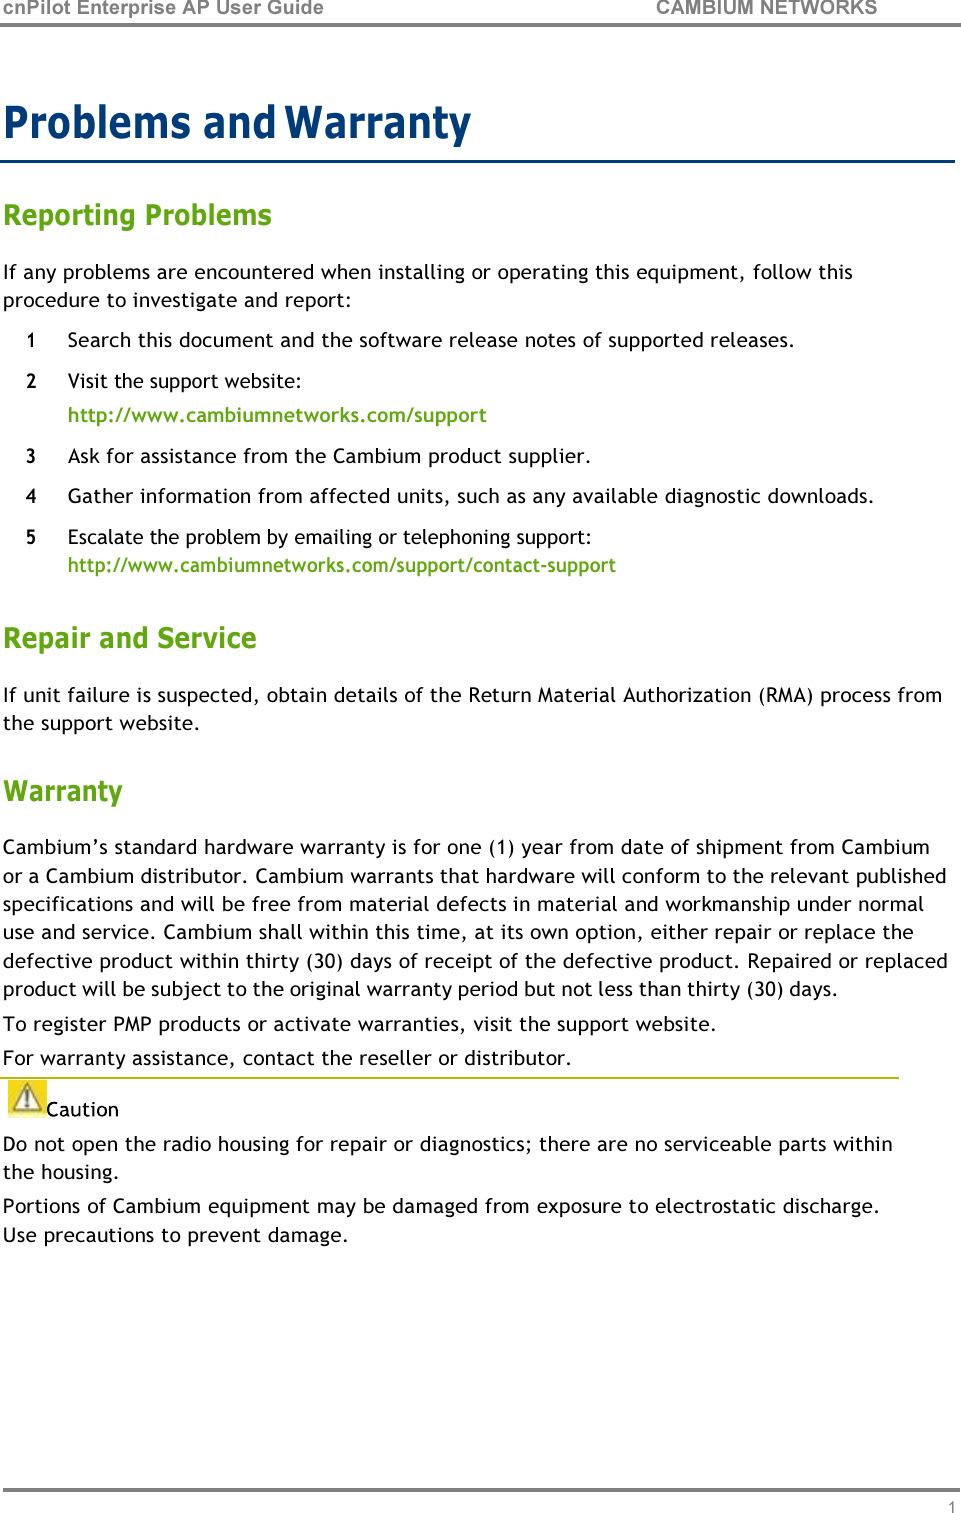 11 cnPilot Enterprise AP User Guide CAMBIUM NETWORKS     Problems and Warranty  Reporting Problems If any problems are encountered when installing or operating this equipment, follow this procedure to investigate and report:  1 Search this document and the software release notes of supported releases. 2 Visit the support website: http://www.cambiumnetworks.com/support 3 Ask for assistance from the Cambium product supplier. 4 Gather information from affected units, such as any available diagnostic downloads. 5 Escalate the problem by emailing or telephoning support: http://www.cambiumnetworks.com/support/contact-support  Repair and Service If unit failure is suspected, obtain details of the Return Material Authorization (RMA) process from the support website.  Warranty Cambium’s standard hardware warranty is for one (1) year from date of shipment from Cambium or a Cambium distributor. Cambium warrants that hardware will conform to the relevant published specifications and will be free from material defects in material and workmanship under normal use and service. Cambium shall within this time, at its own option, either repair or replace the defective product within thirty (30) days of receipt of the defective product. Repaired or replaced product will be subject to the original warranty period but not less than thirty (30) days. To register PMP products or activate warranties, visit the support website. For warranty assistance, contact the reseller or distributor.   Do not open the radio housing for repair or diagnostics; there are no serviceable parts within the housing. Portions of Cambium equipment may be damaged from exposure to electrostatic discharge. Use precautions to prevent damage.  